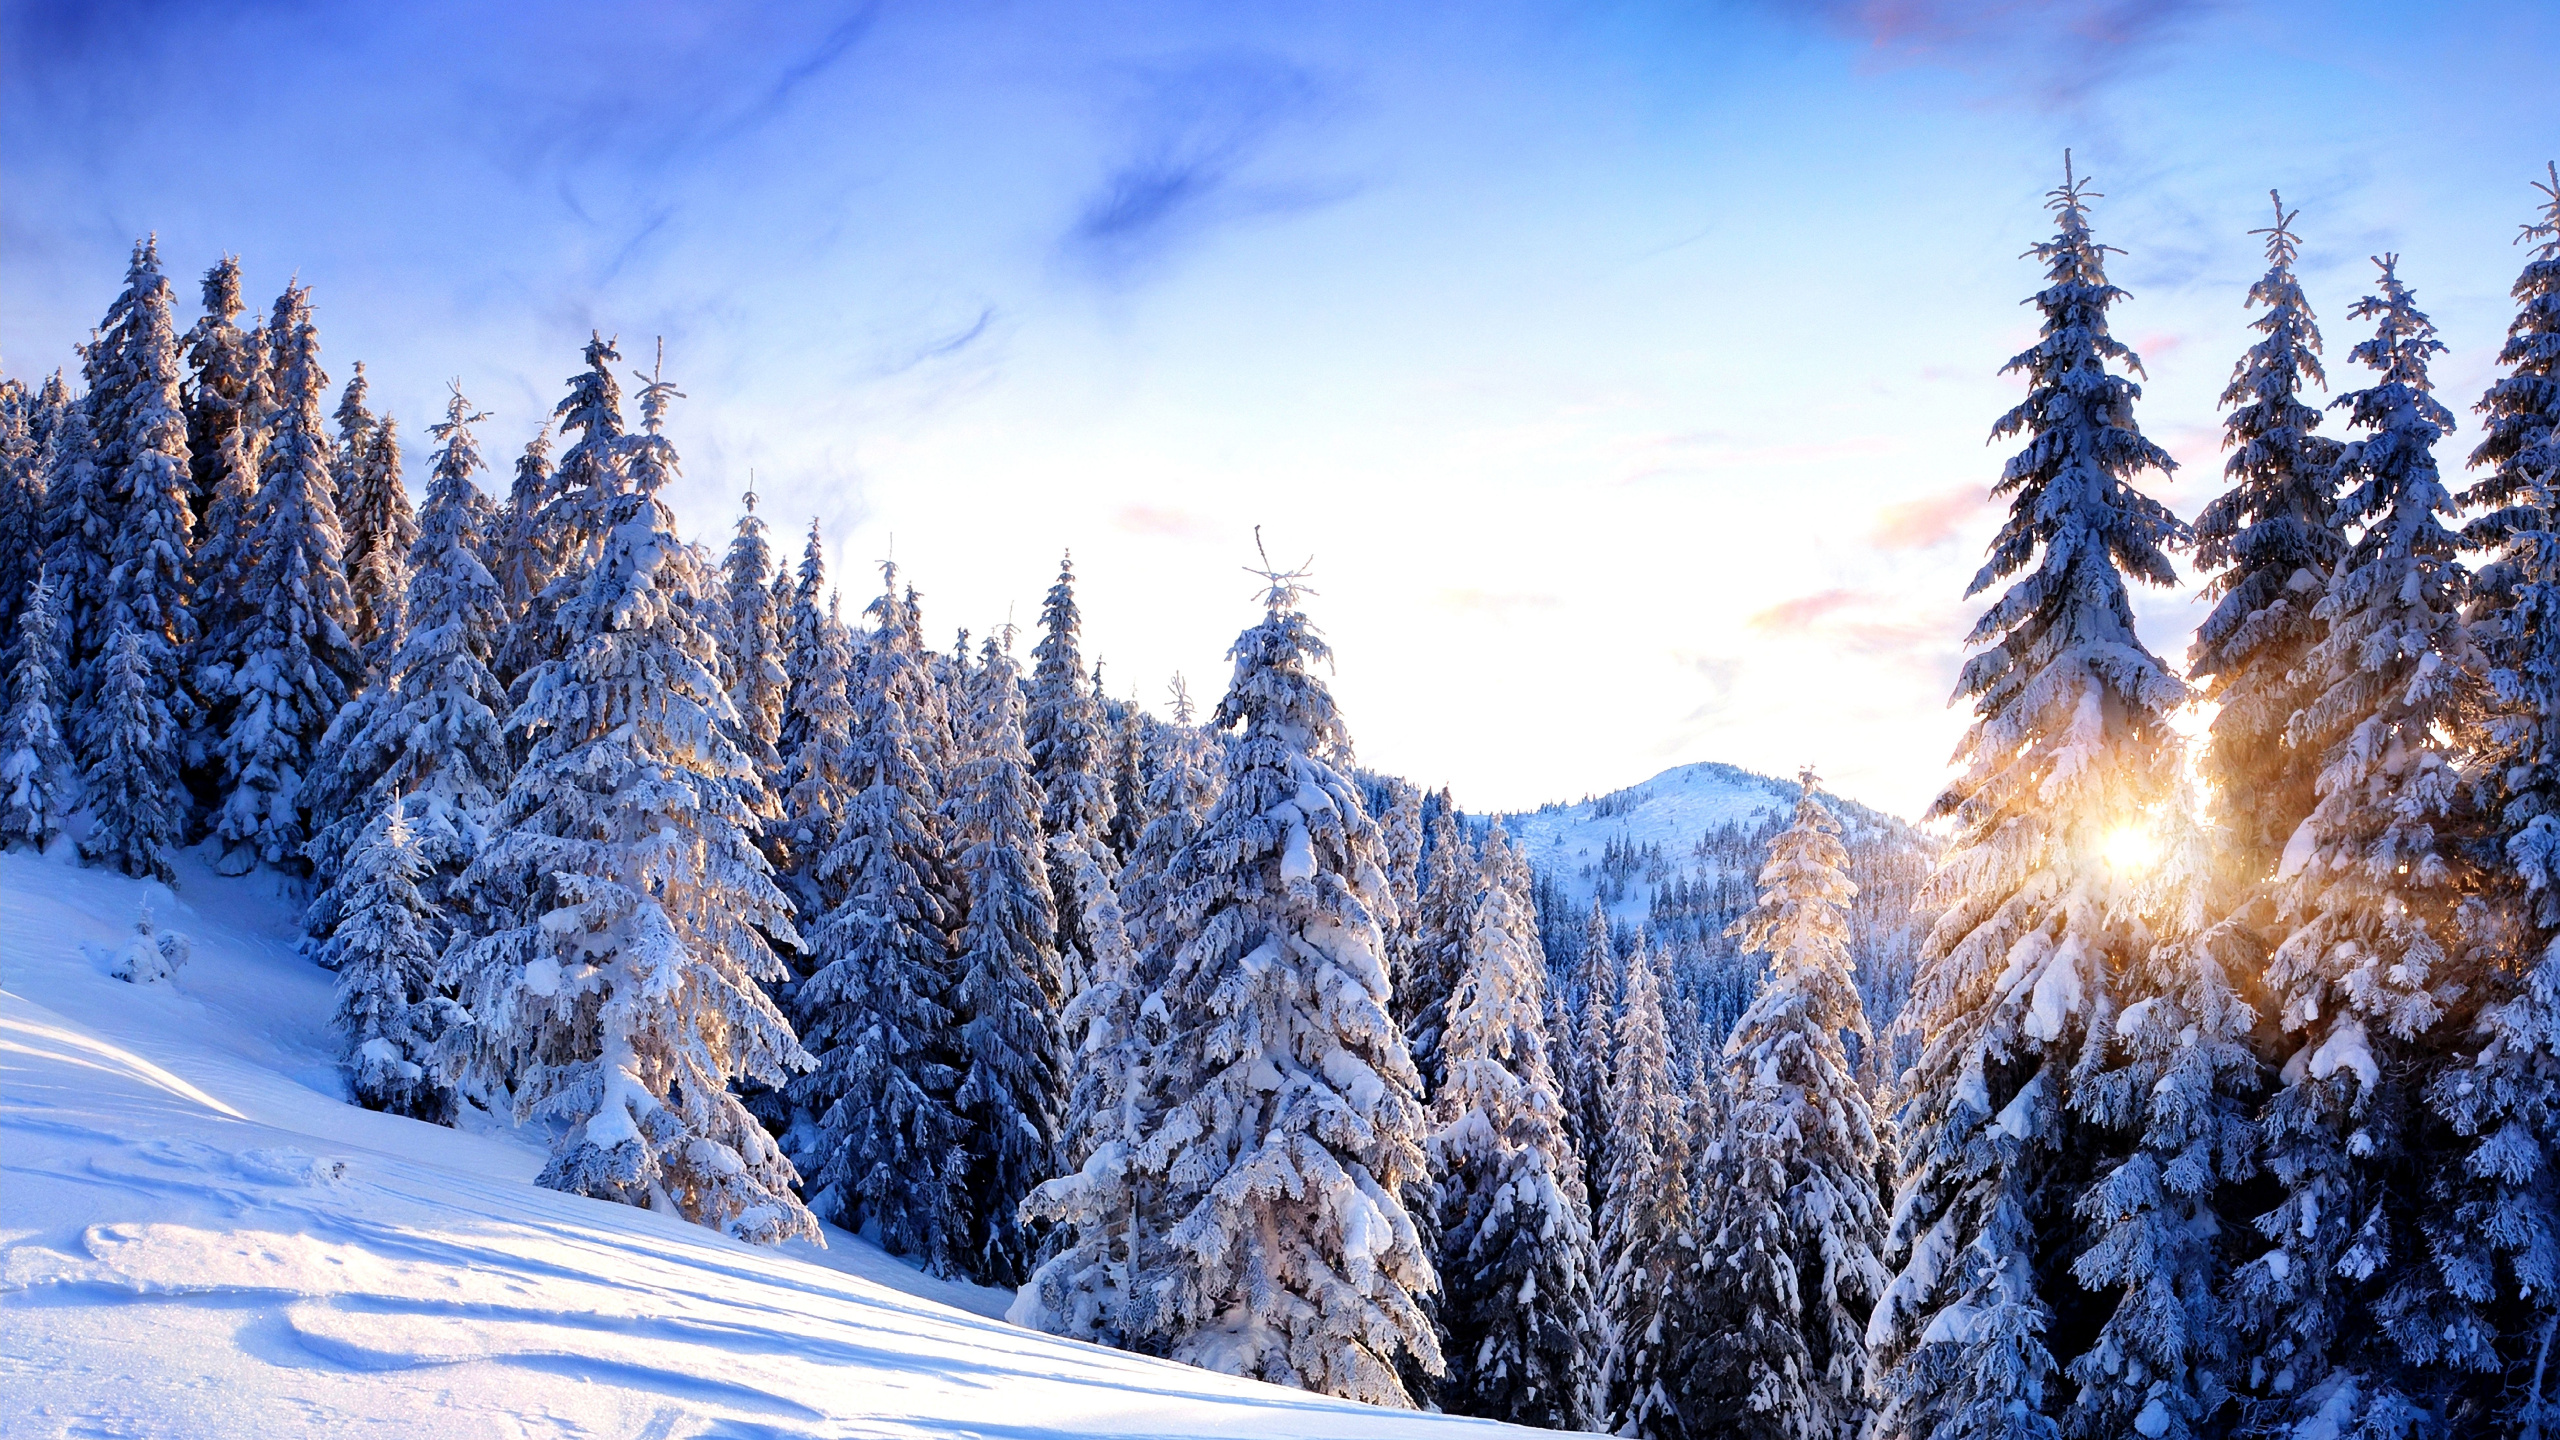 Snow Covered Pine Trees and Mountains During Daytime. Wallpaper in 2560x1440 Resolution